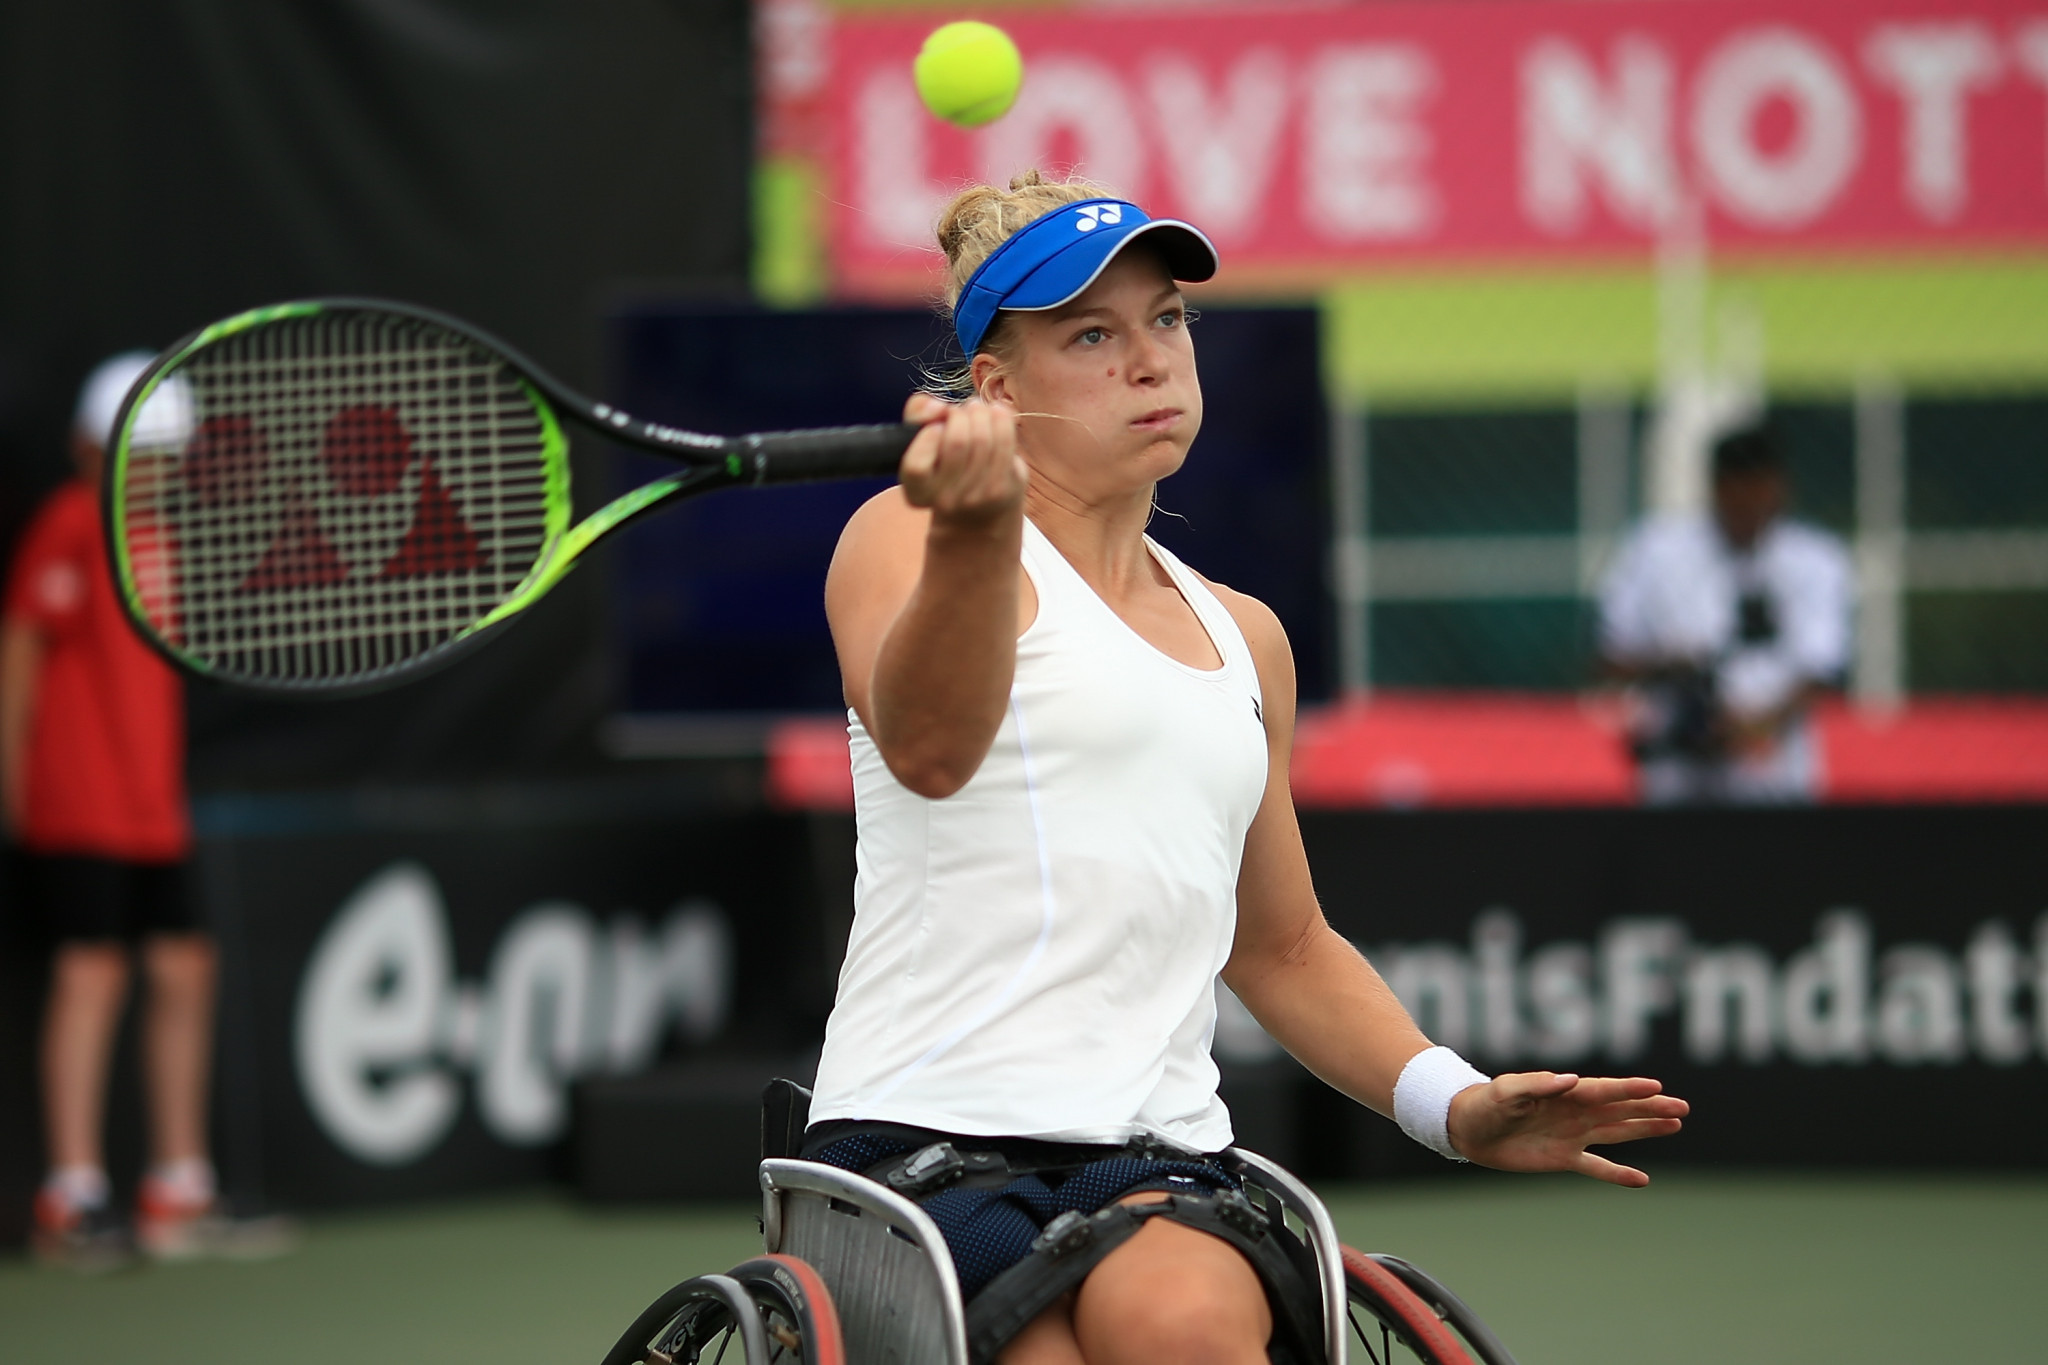 Two wheelchair tennis players make shortlist for July's Allianz Athlete of the Month